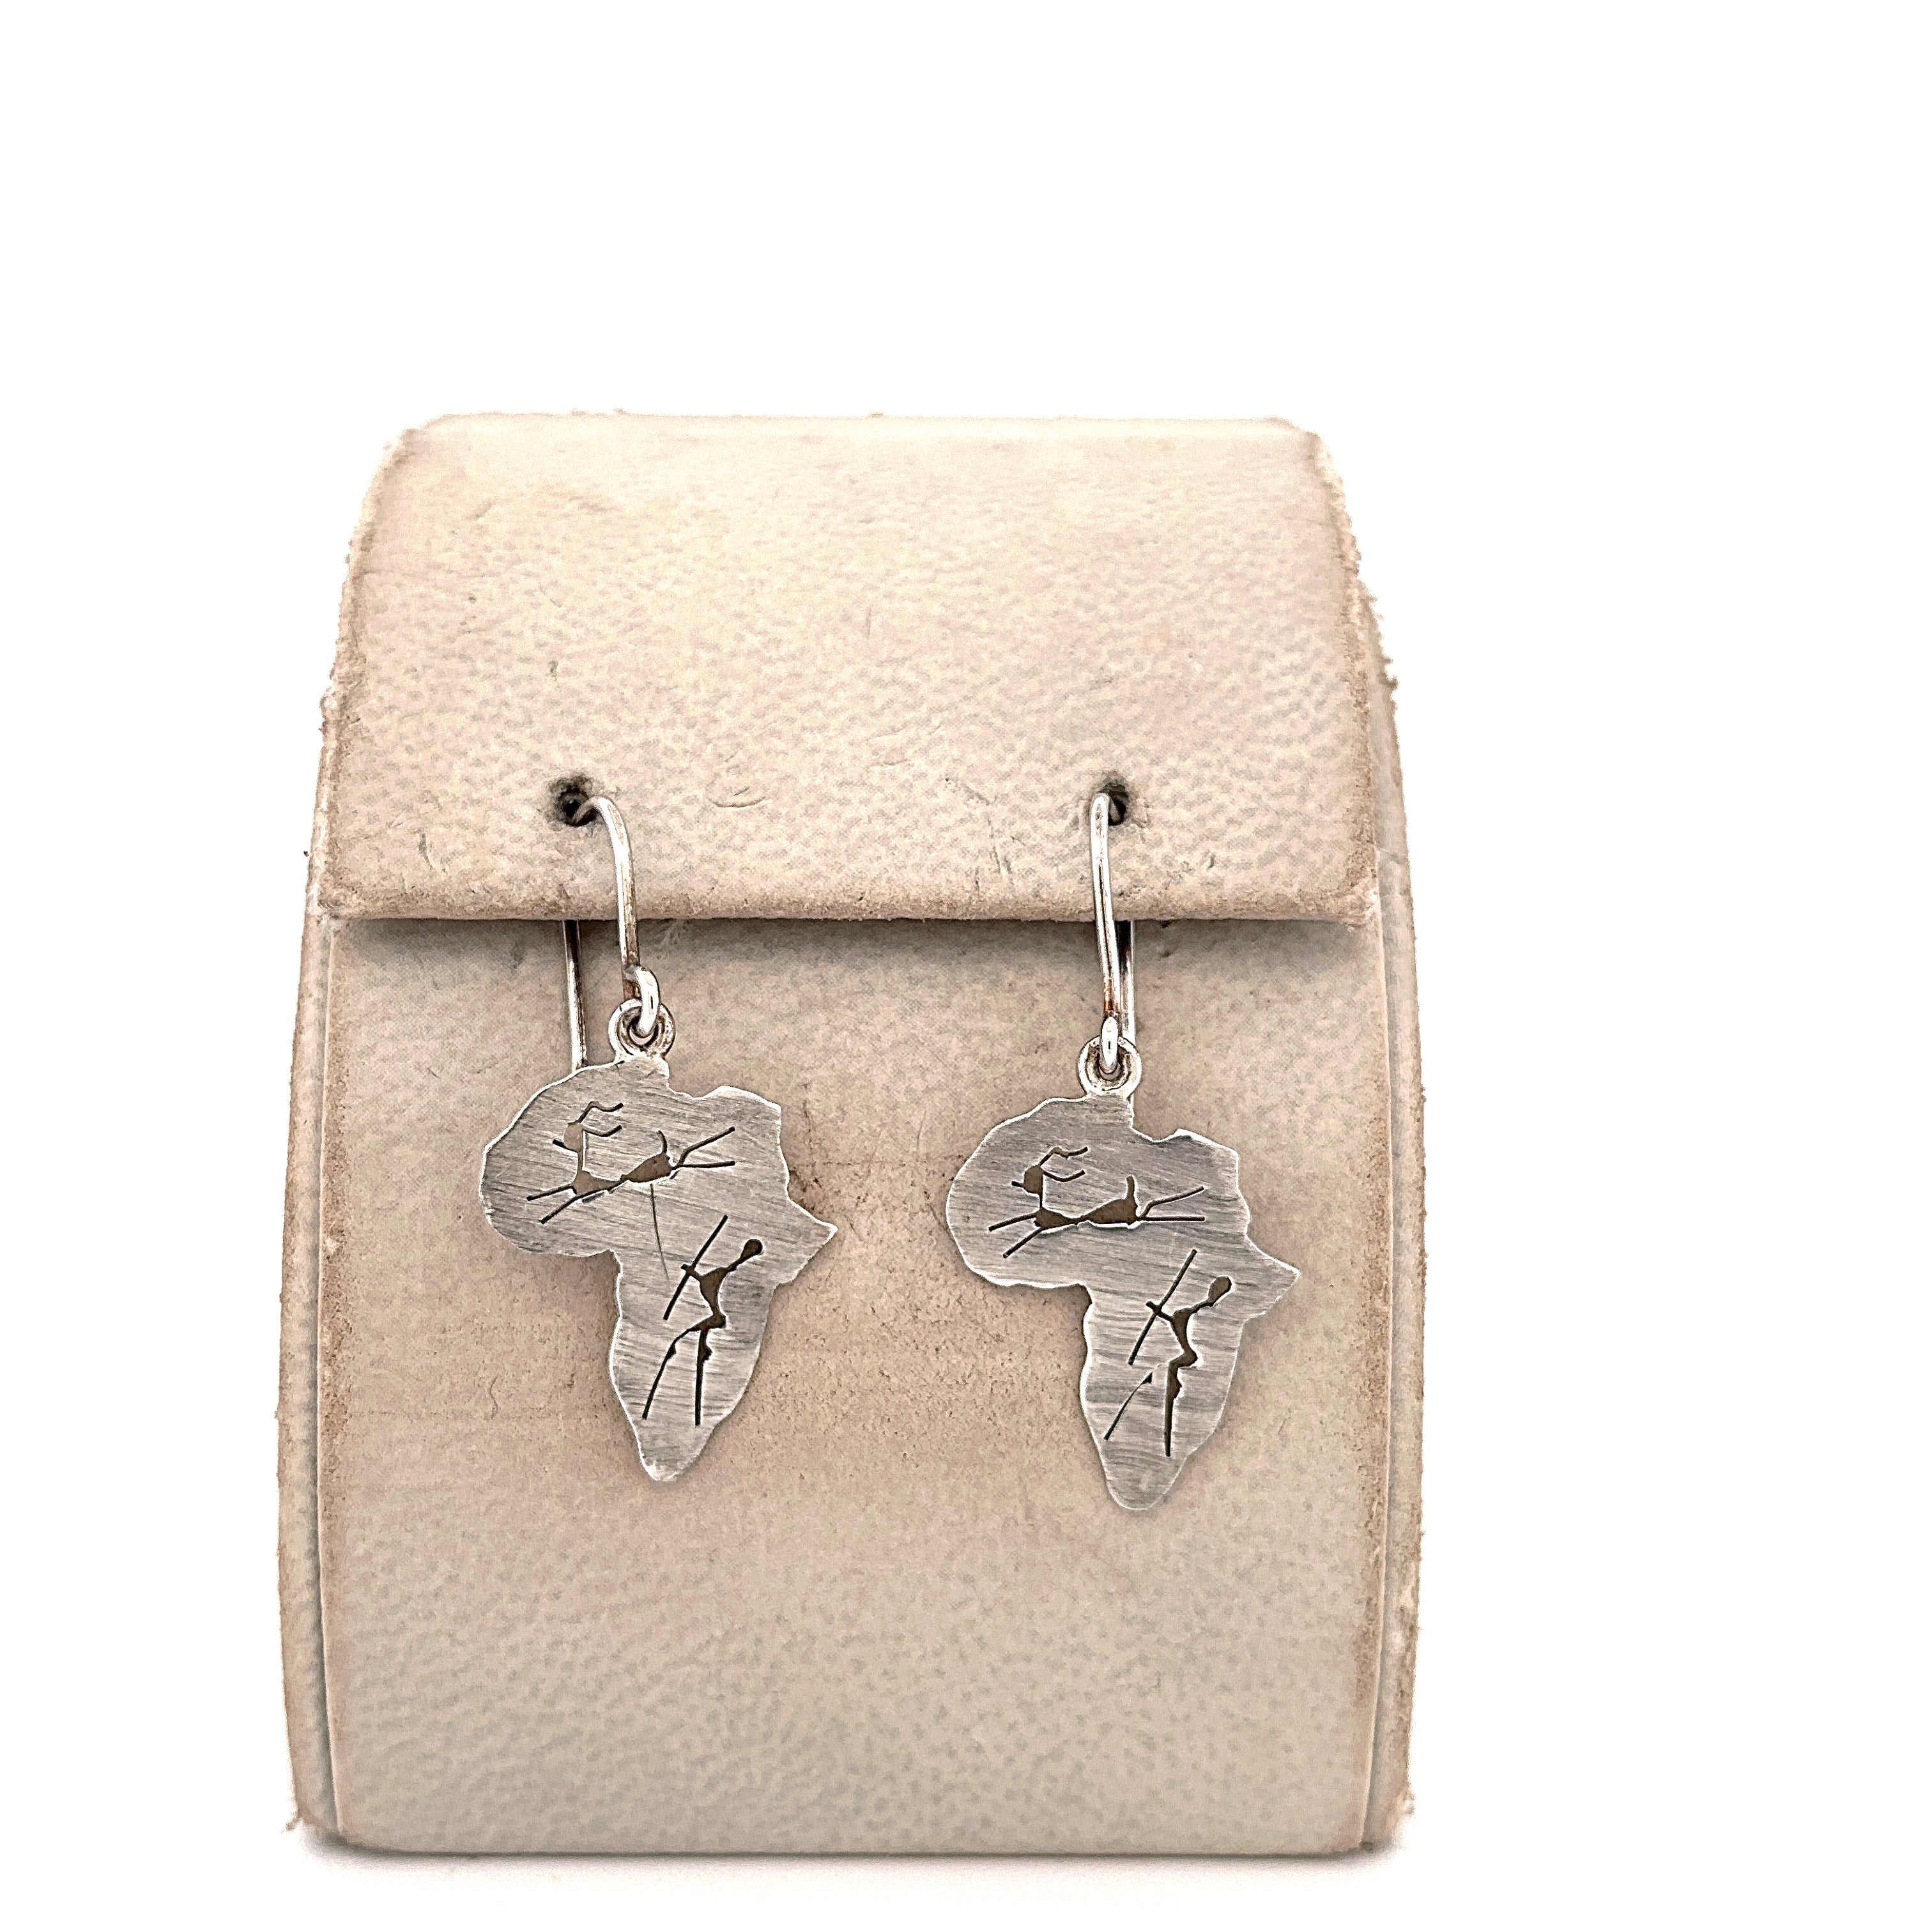 Silver Map of africa earring